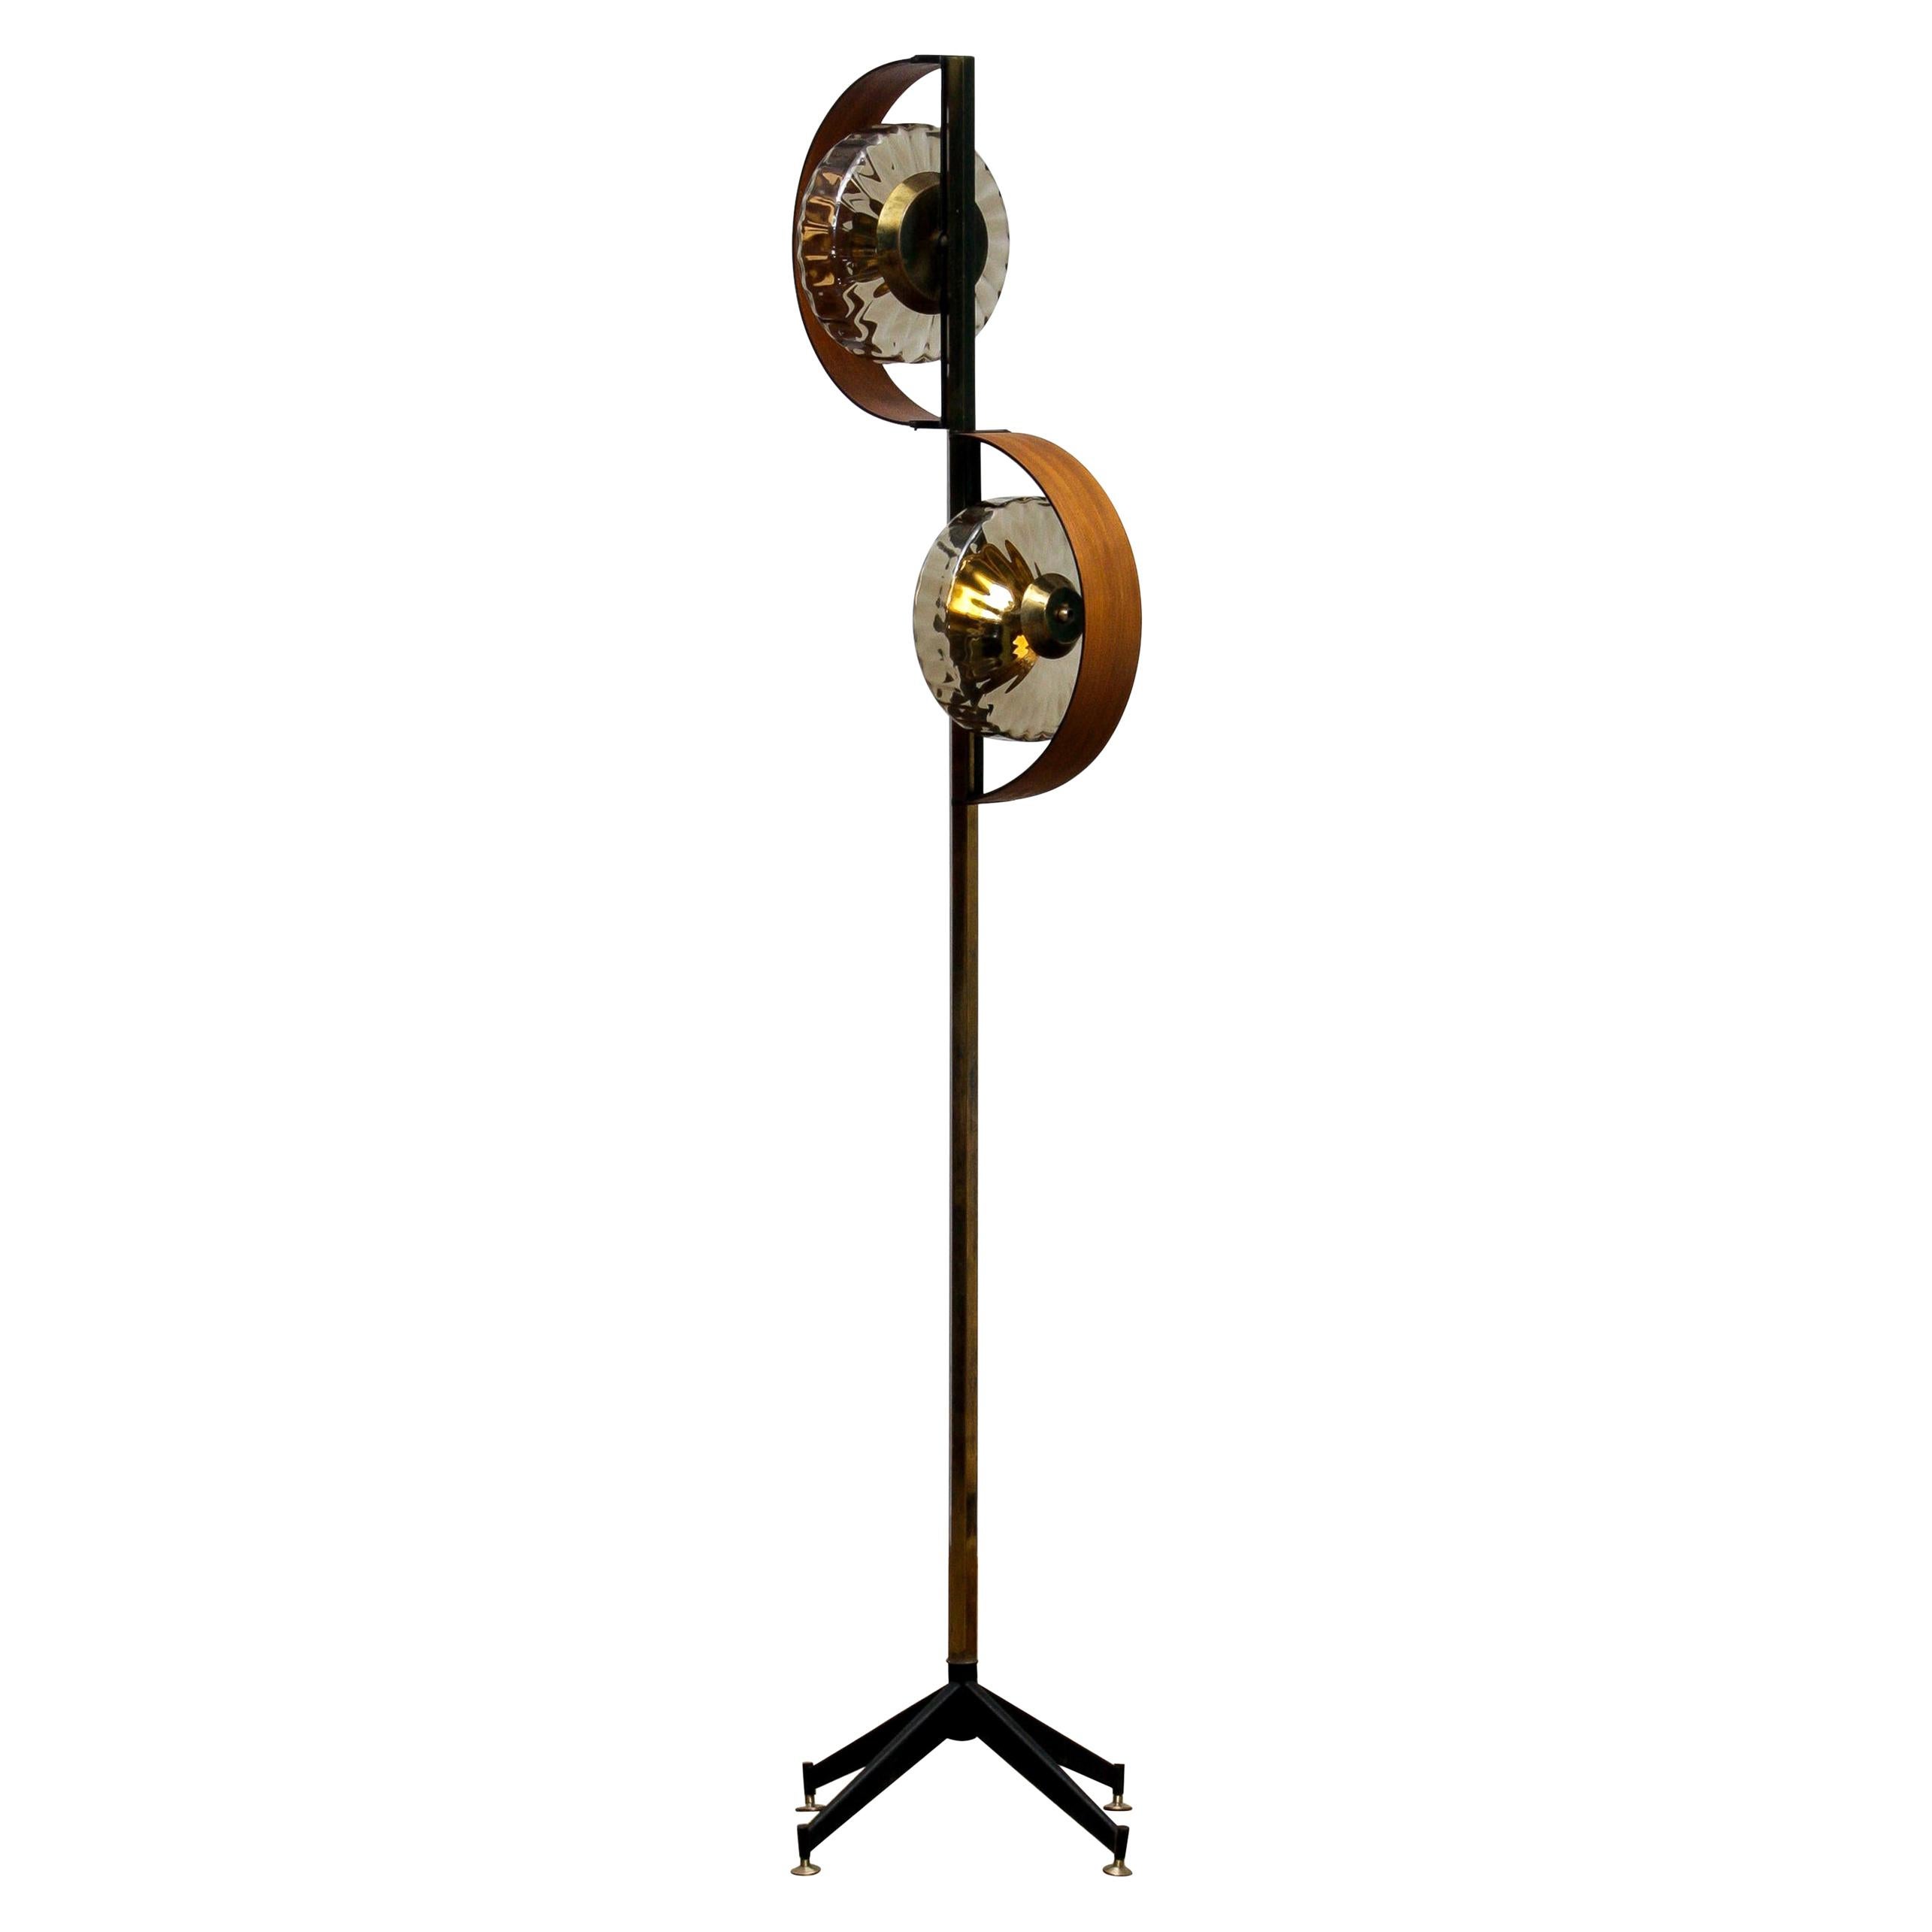 1950s Italian Floor Lamp Made in Brass and Teak with Smoked Glass Shades